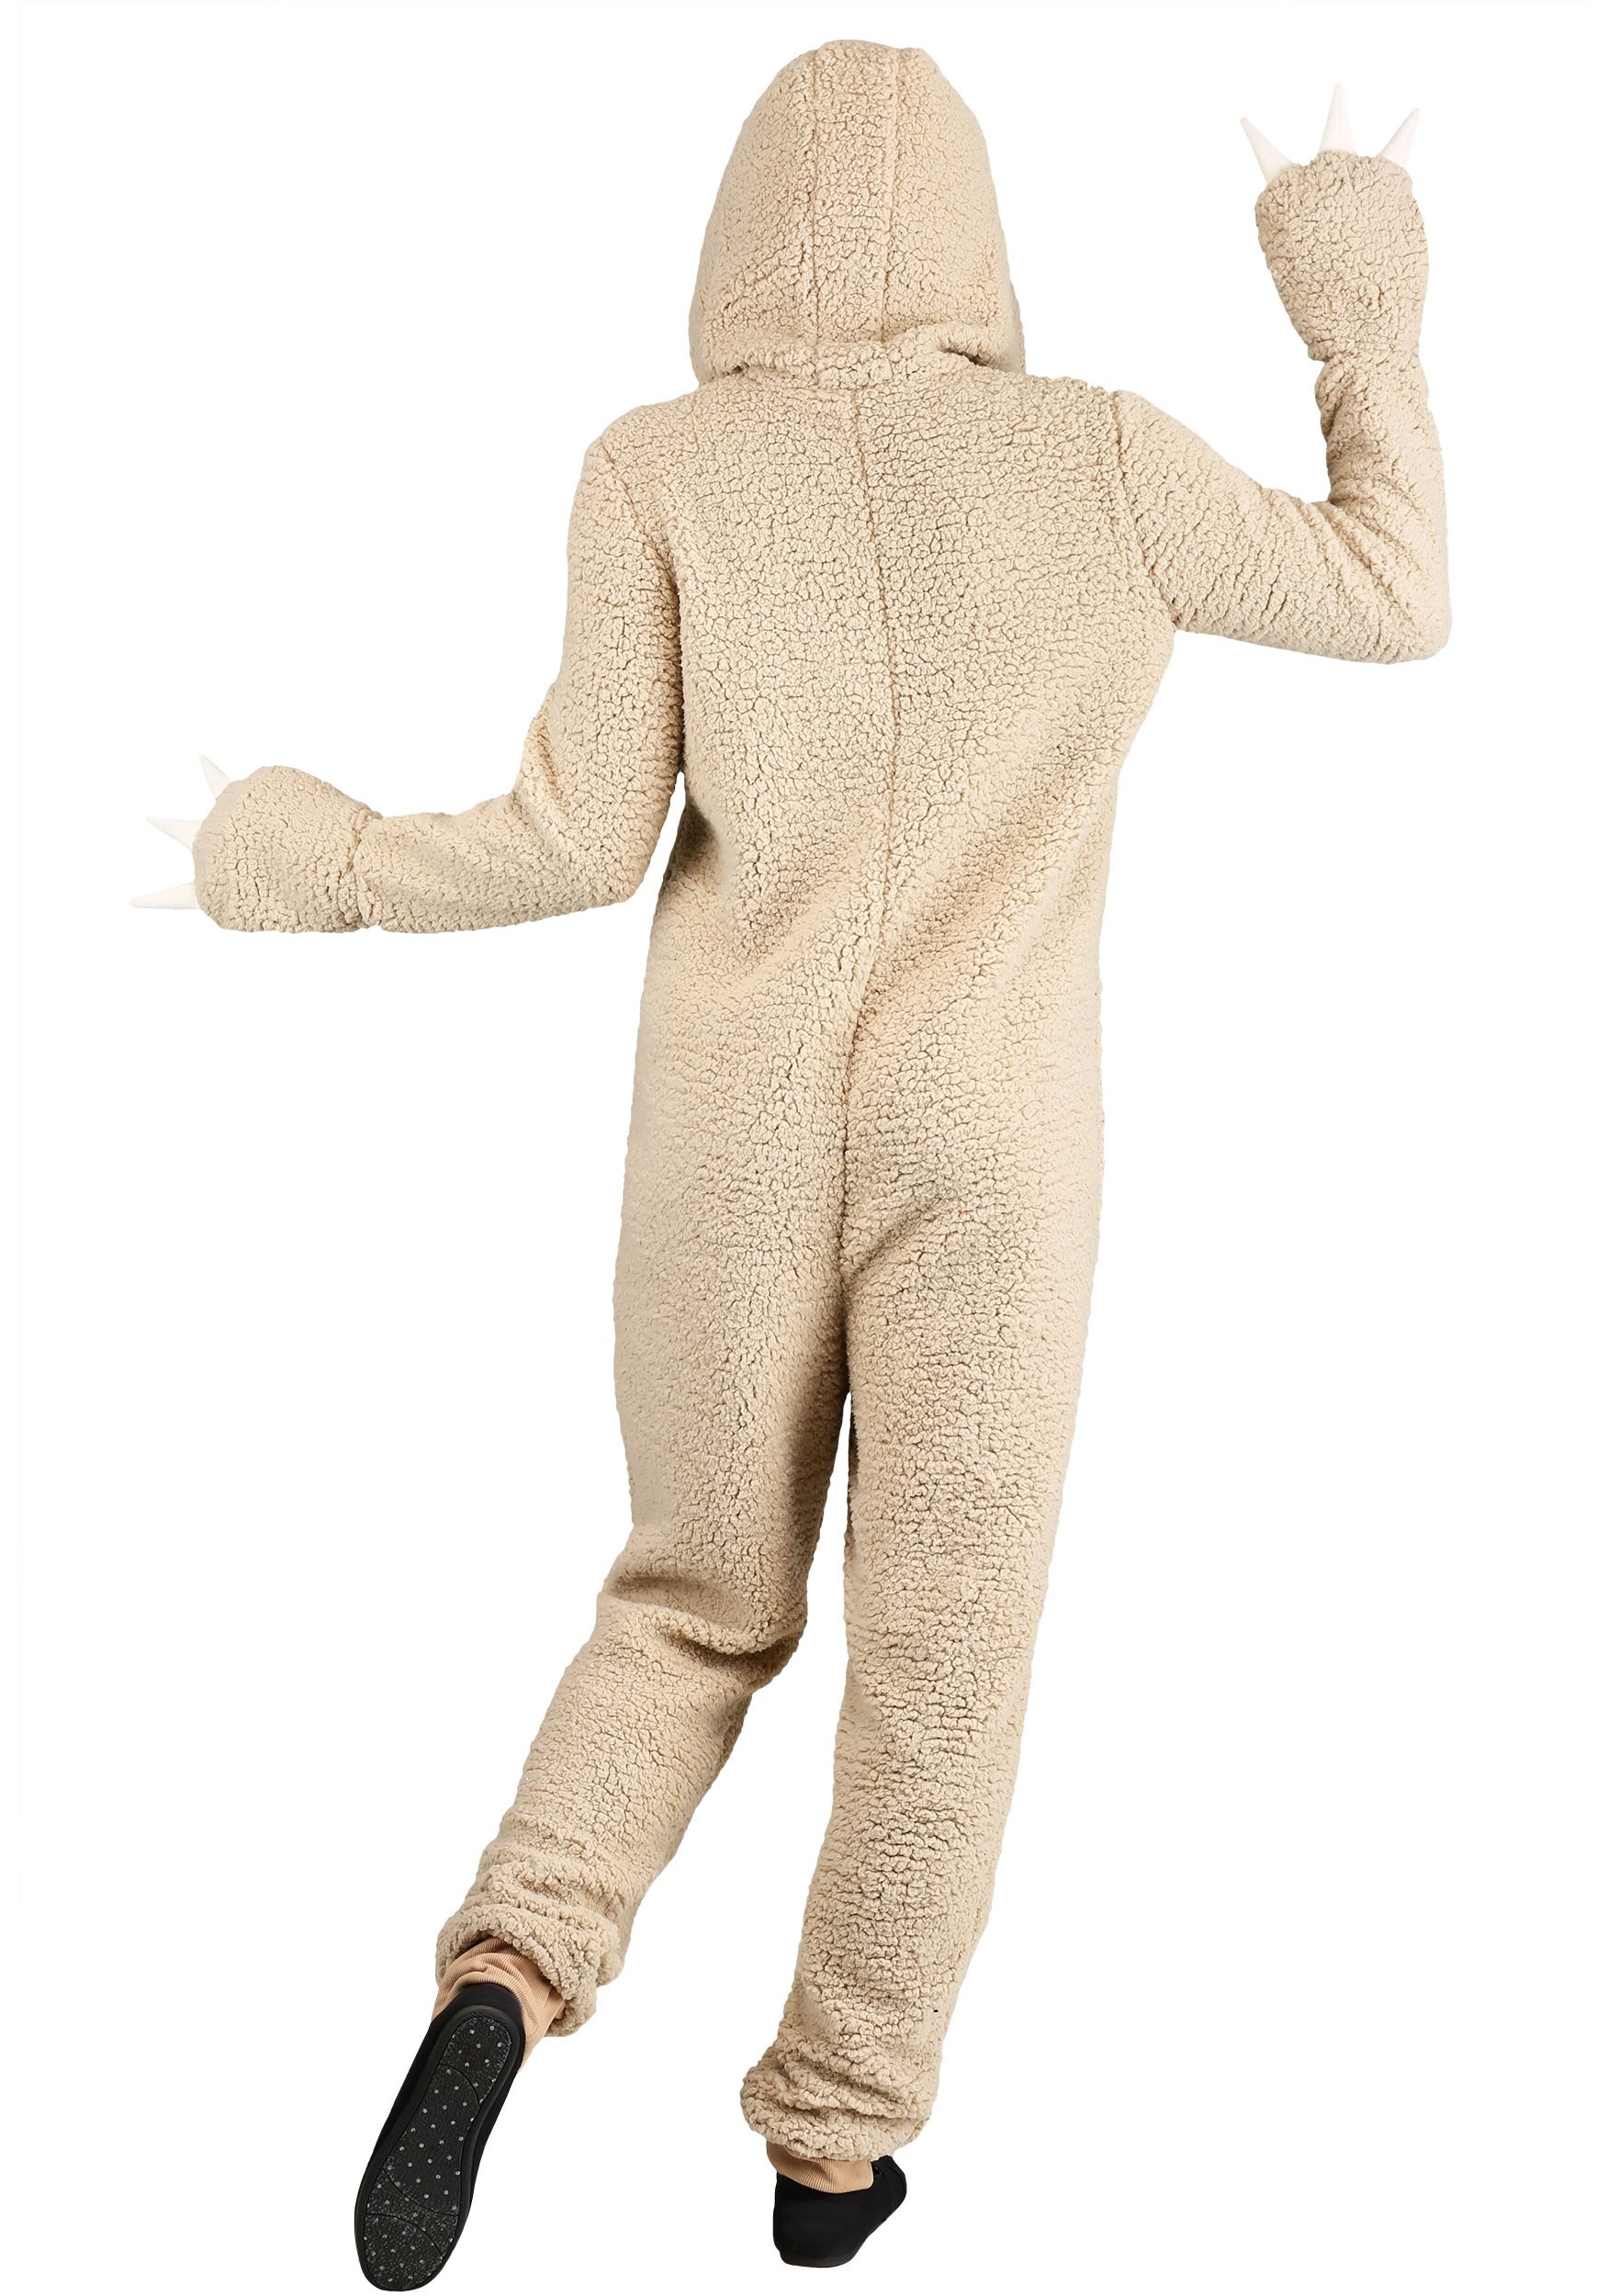 Sloth Onesie For Adults